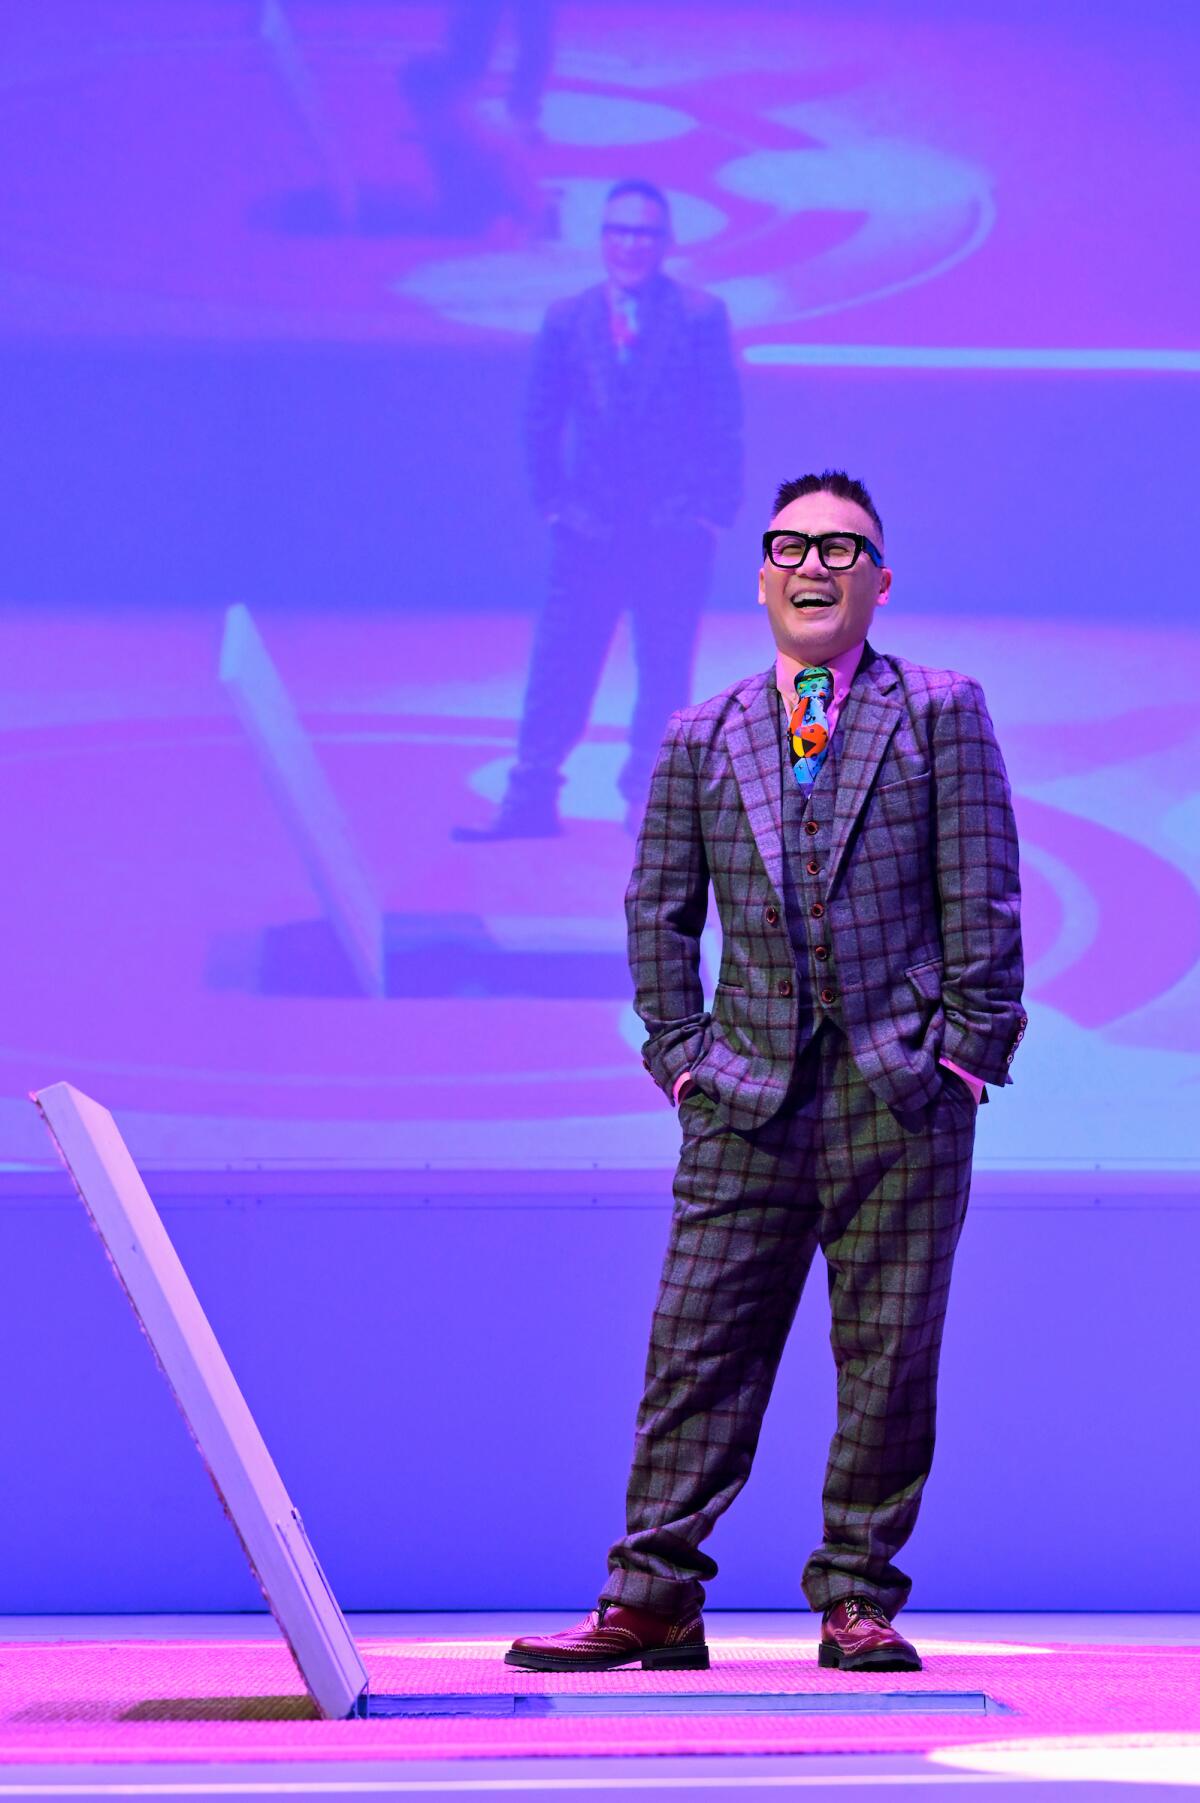 A smiling person in a checked suit and multicolored tie stands on a stage with a screen behind him showing him.